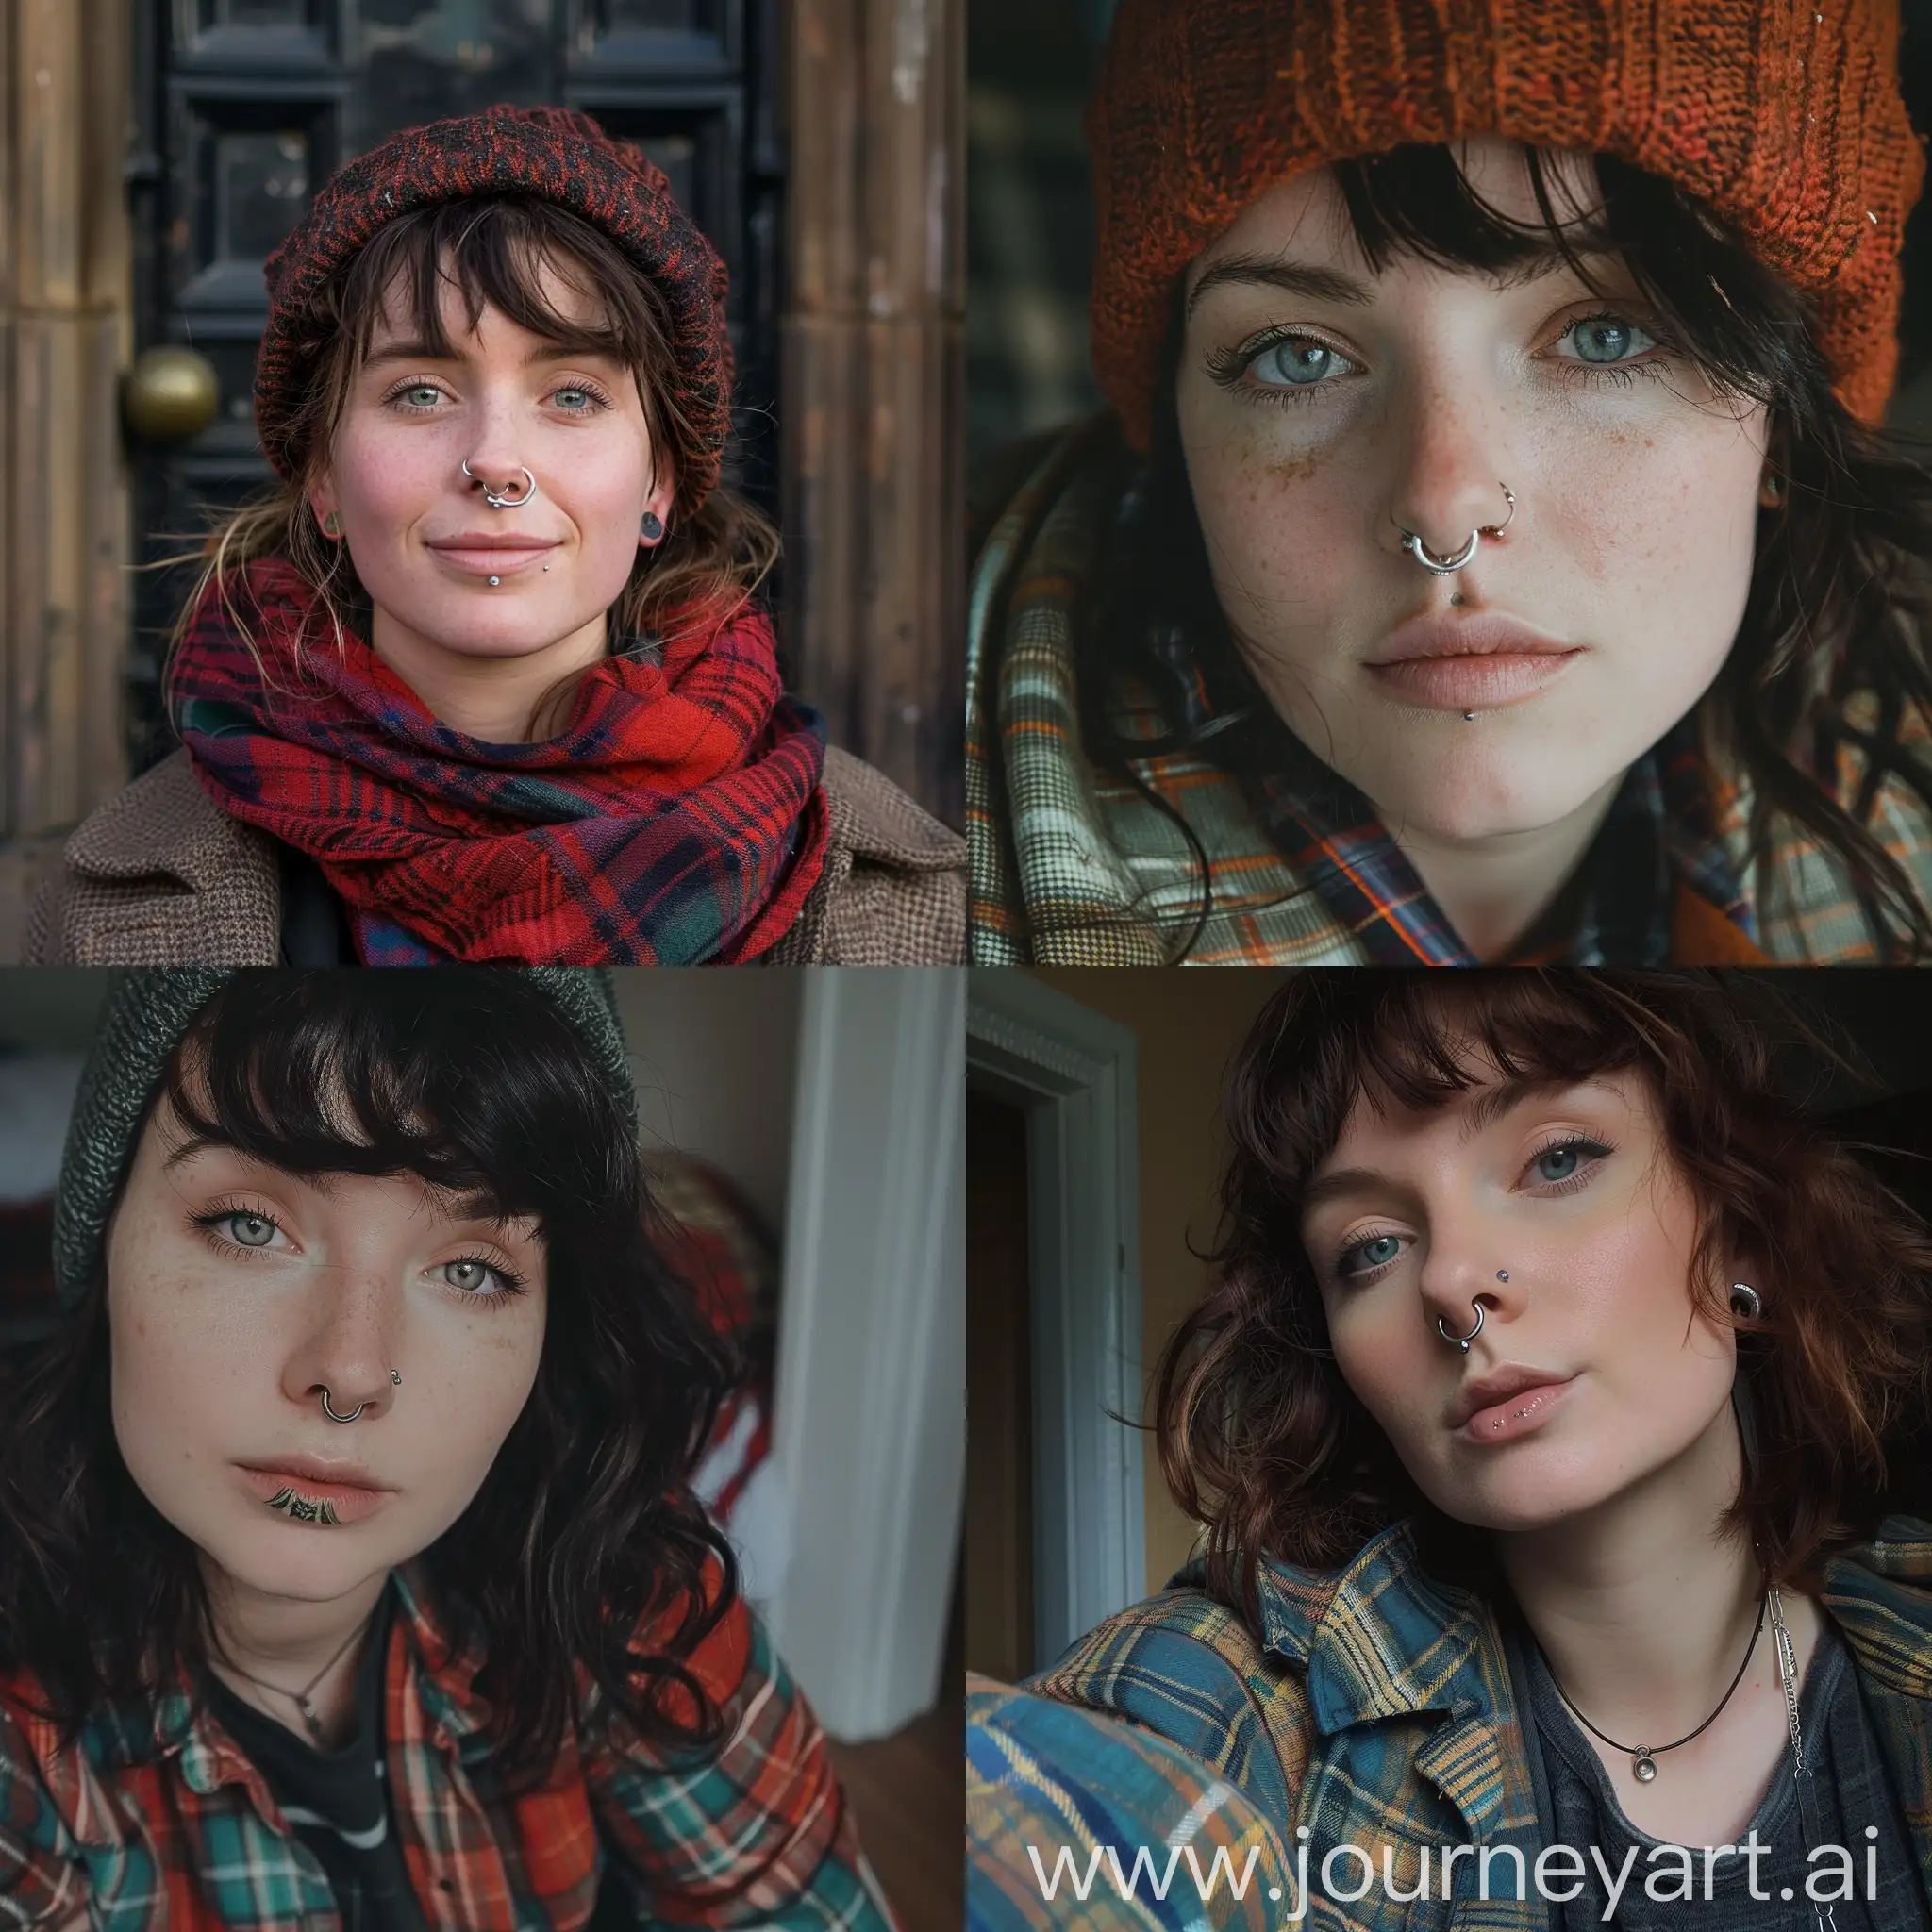 Young-Woman-in-Hipster-Attire-with-Nose-Ring-and-Scottish-Influence-Portrait